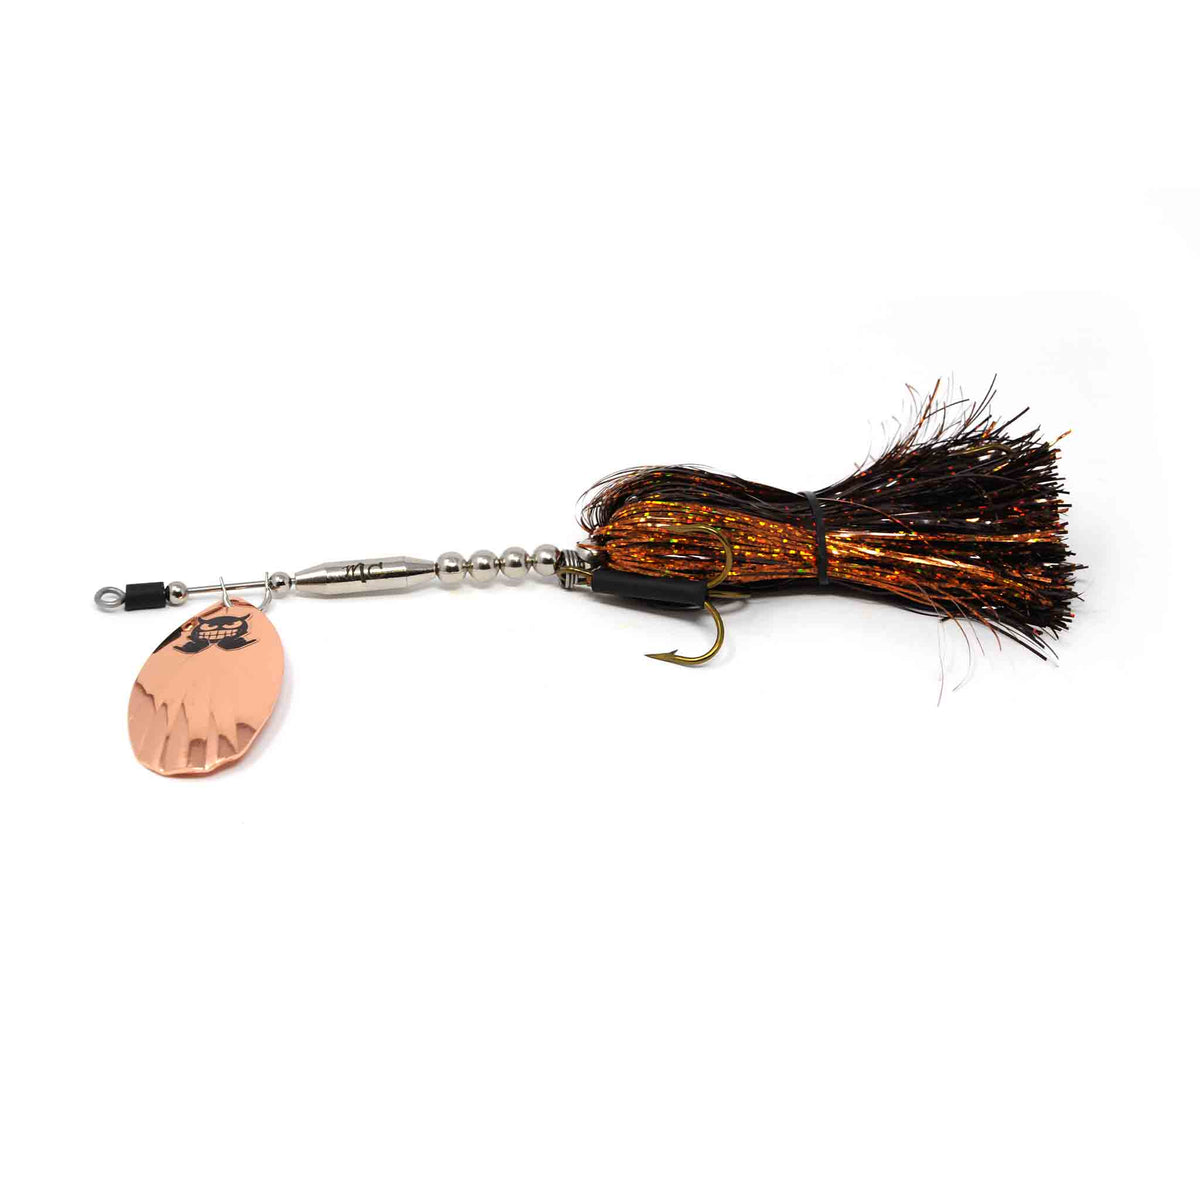 Mad Chasse Mini Single Fluted 8 Root Beer Bucktails